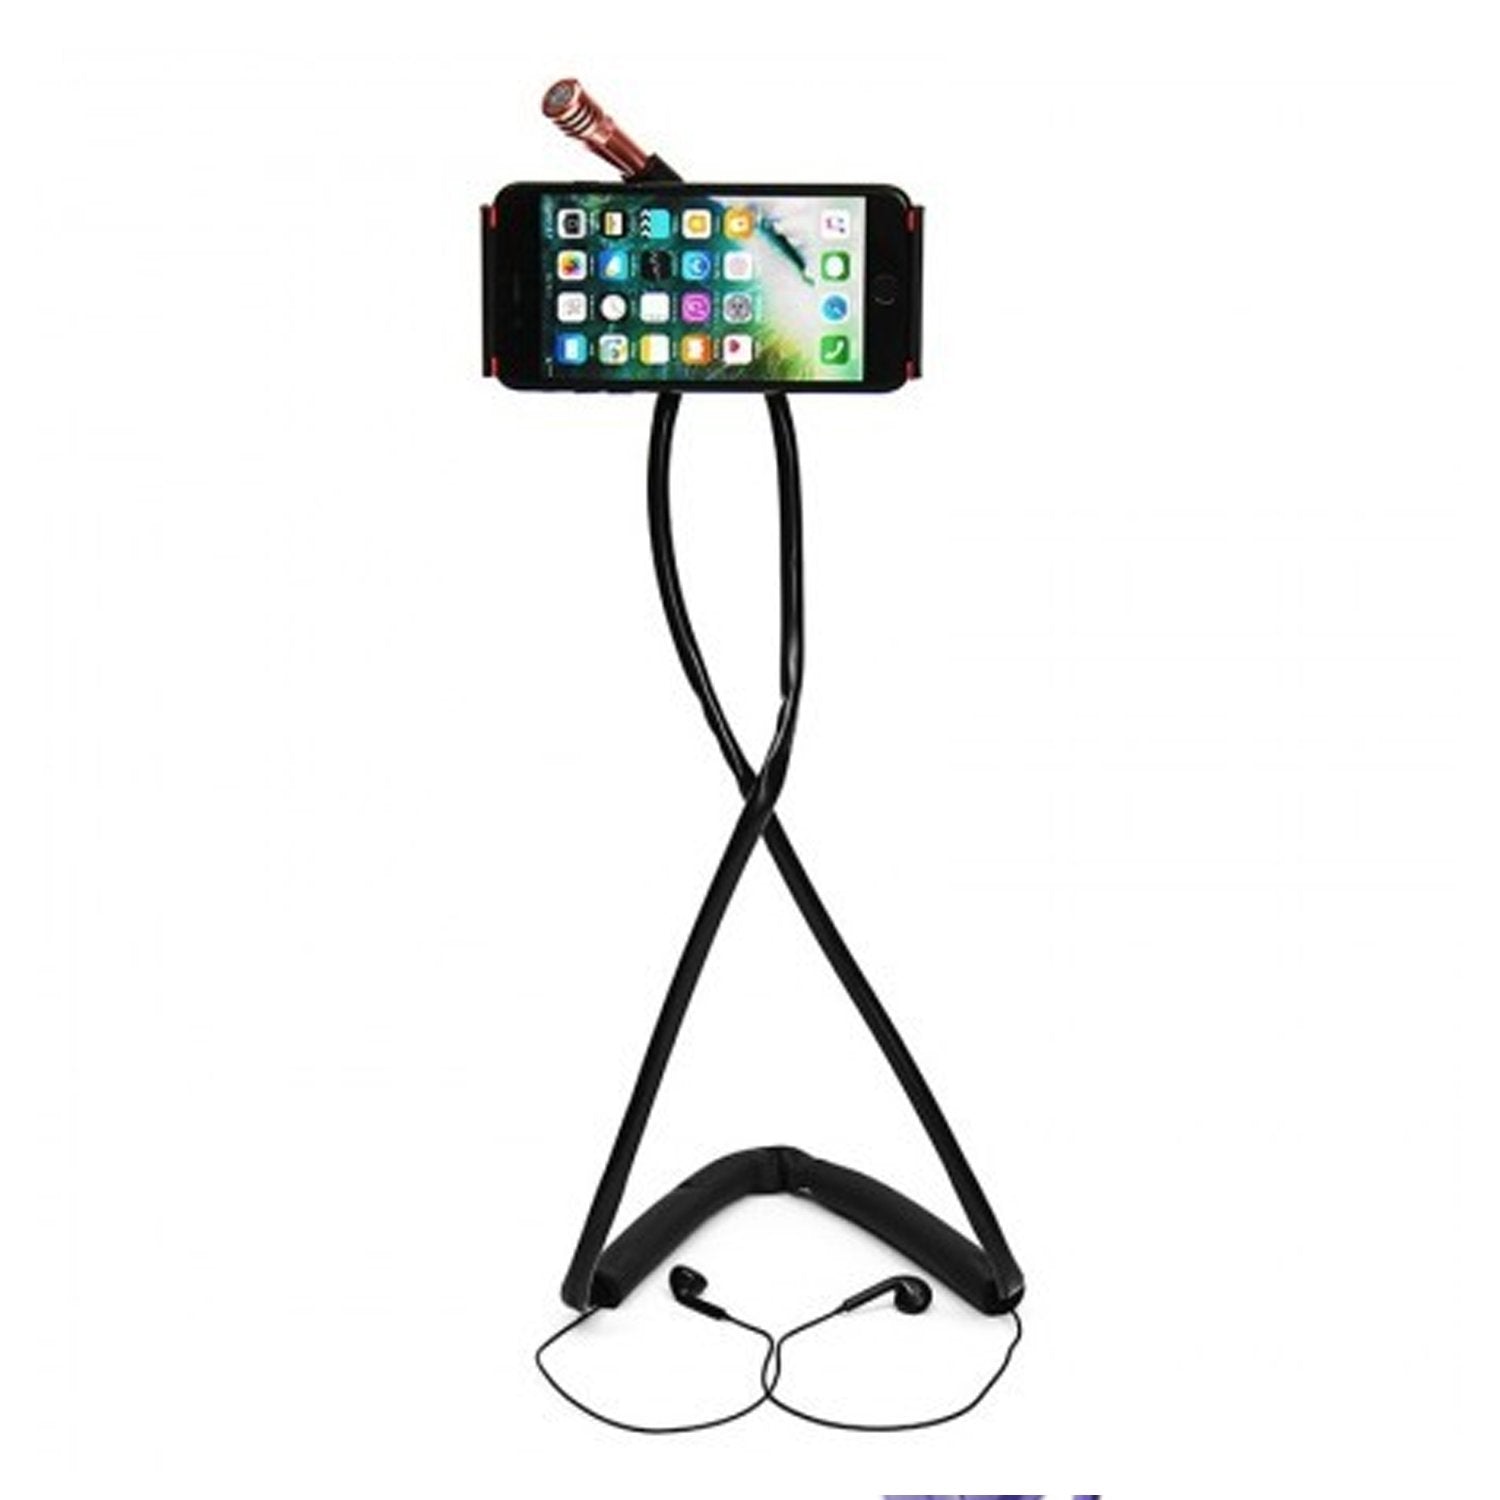 6016 Phone Neck Holder, Lazy Neck Phone Mount to Free Your Hands ( with Box)